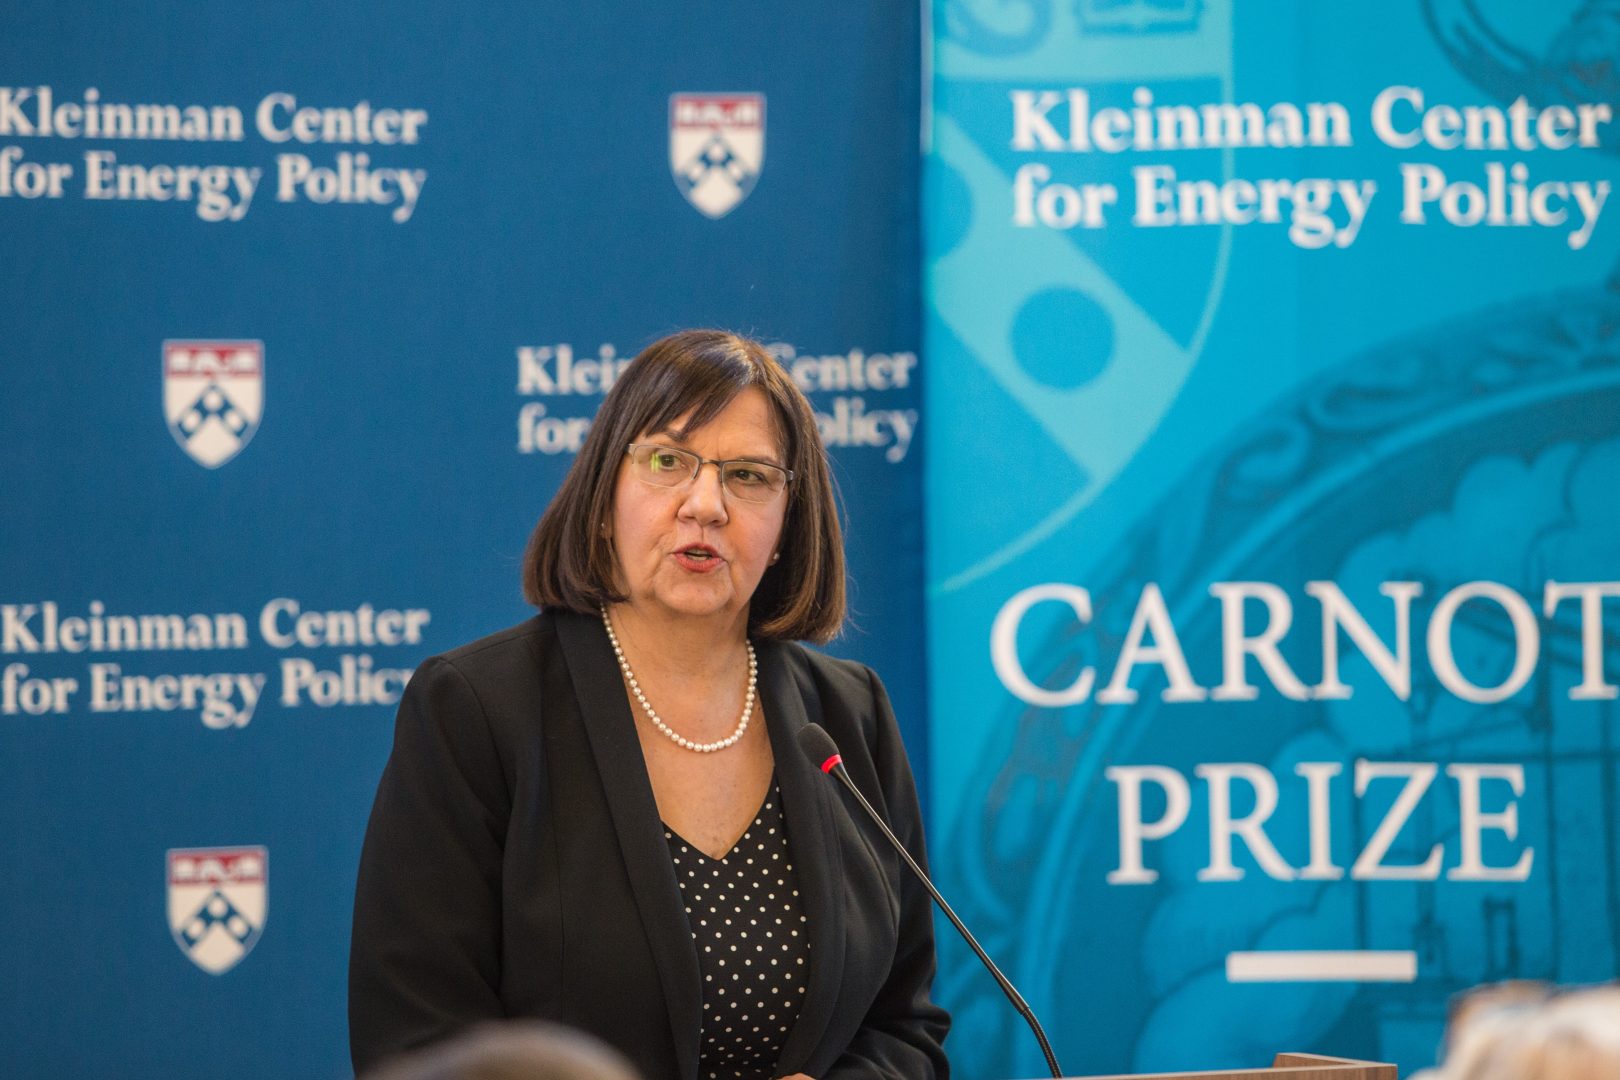 Cheryl LaFleur, former commissioner at the Federal Energy Regulatory Commission, received the Carnot Prize for distinguished contributions to energy policy from the Kleinman Center for Energy Policy at the University of Pennsylvania.